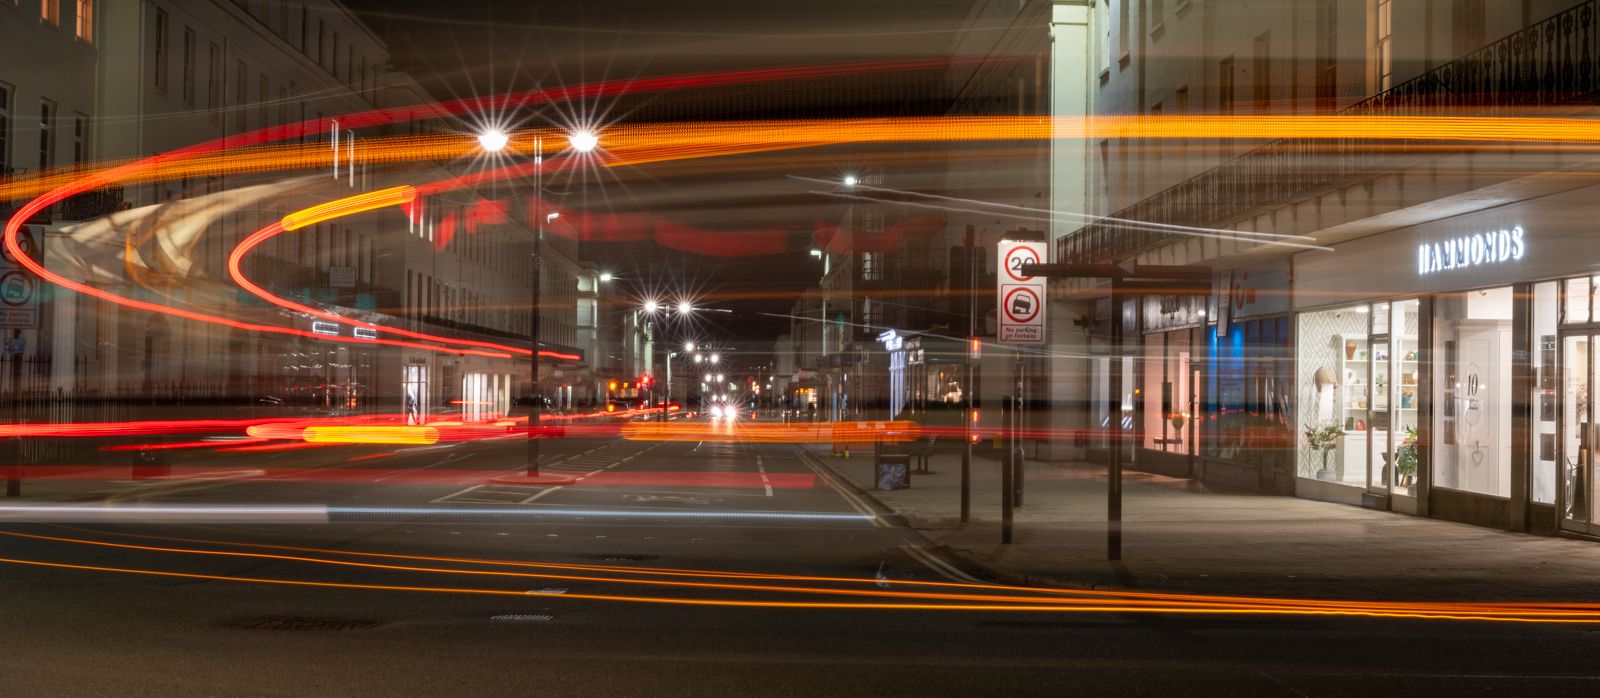 A long-exposure night shot captures the vibrant streaks of light from moving vehicles. The light trails curve through the frame, with city street scenery in the background including illuminated buildings and signage.